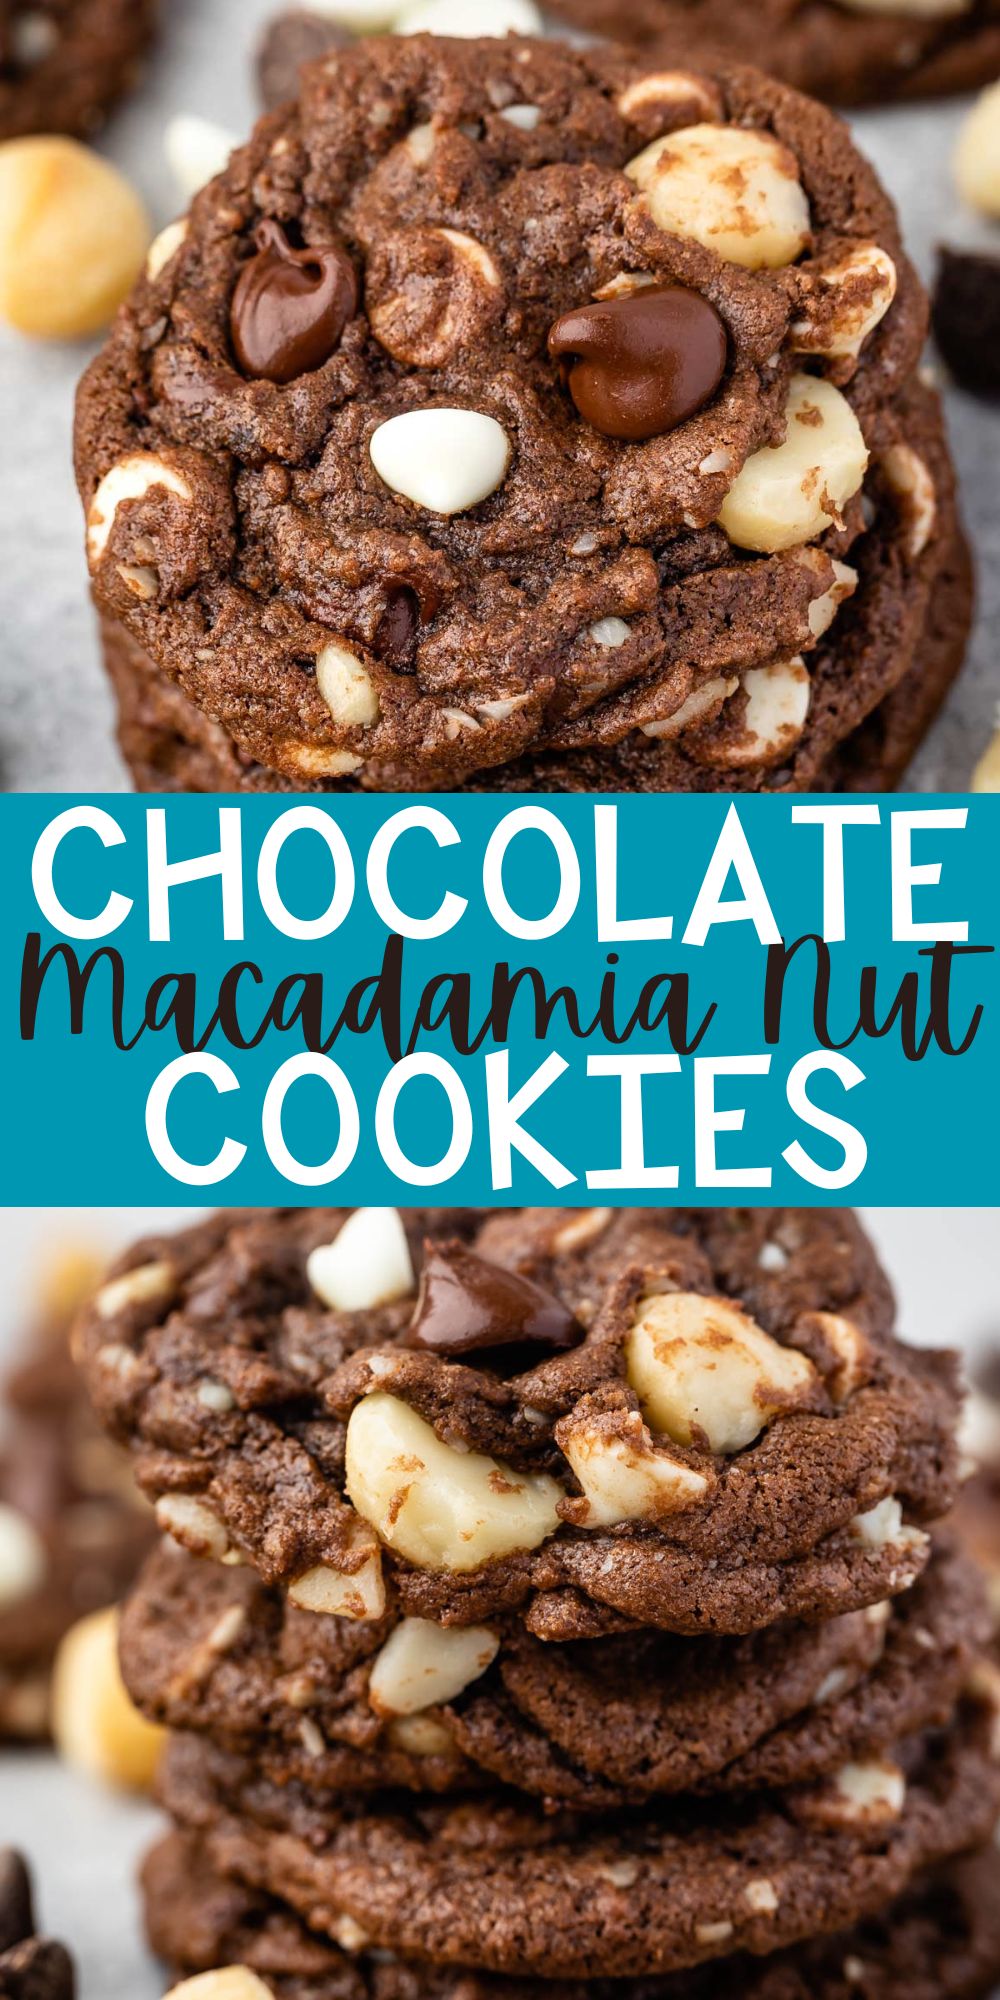 two photos of cookies with chocolate chips and macadamia nuts baked in with words on the image.